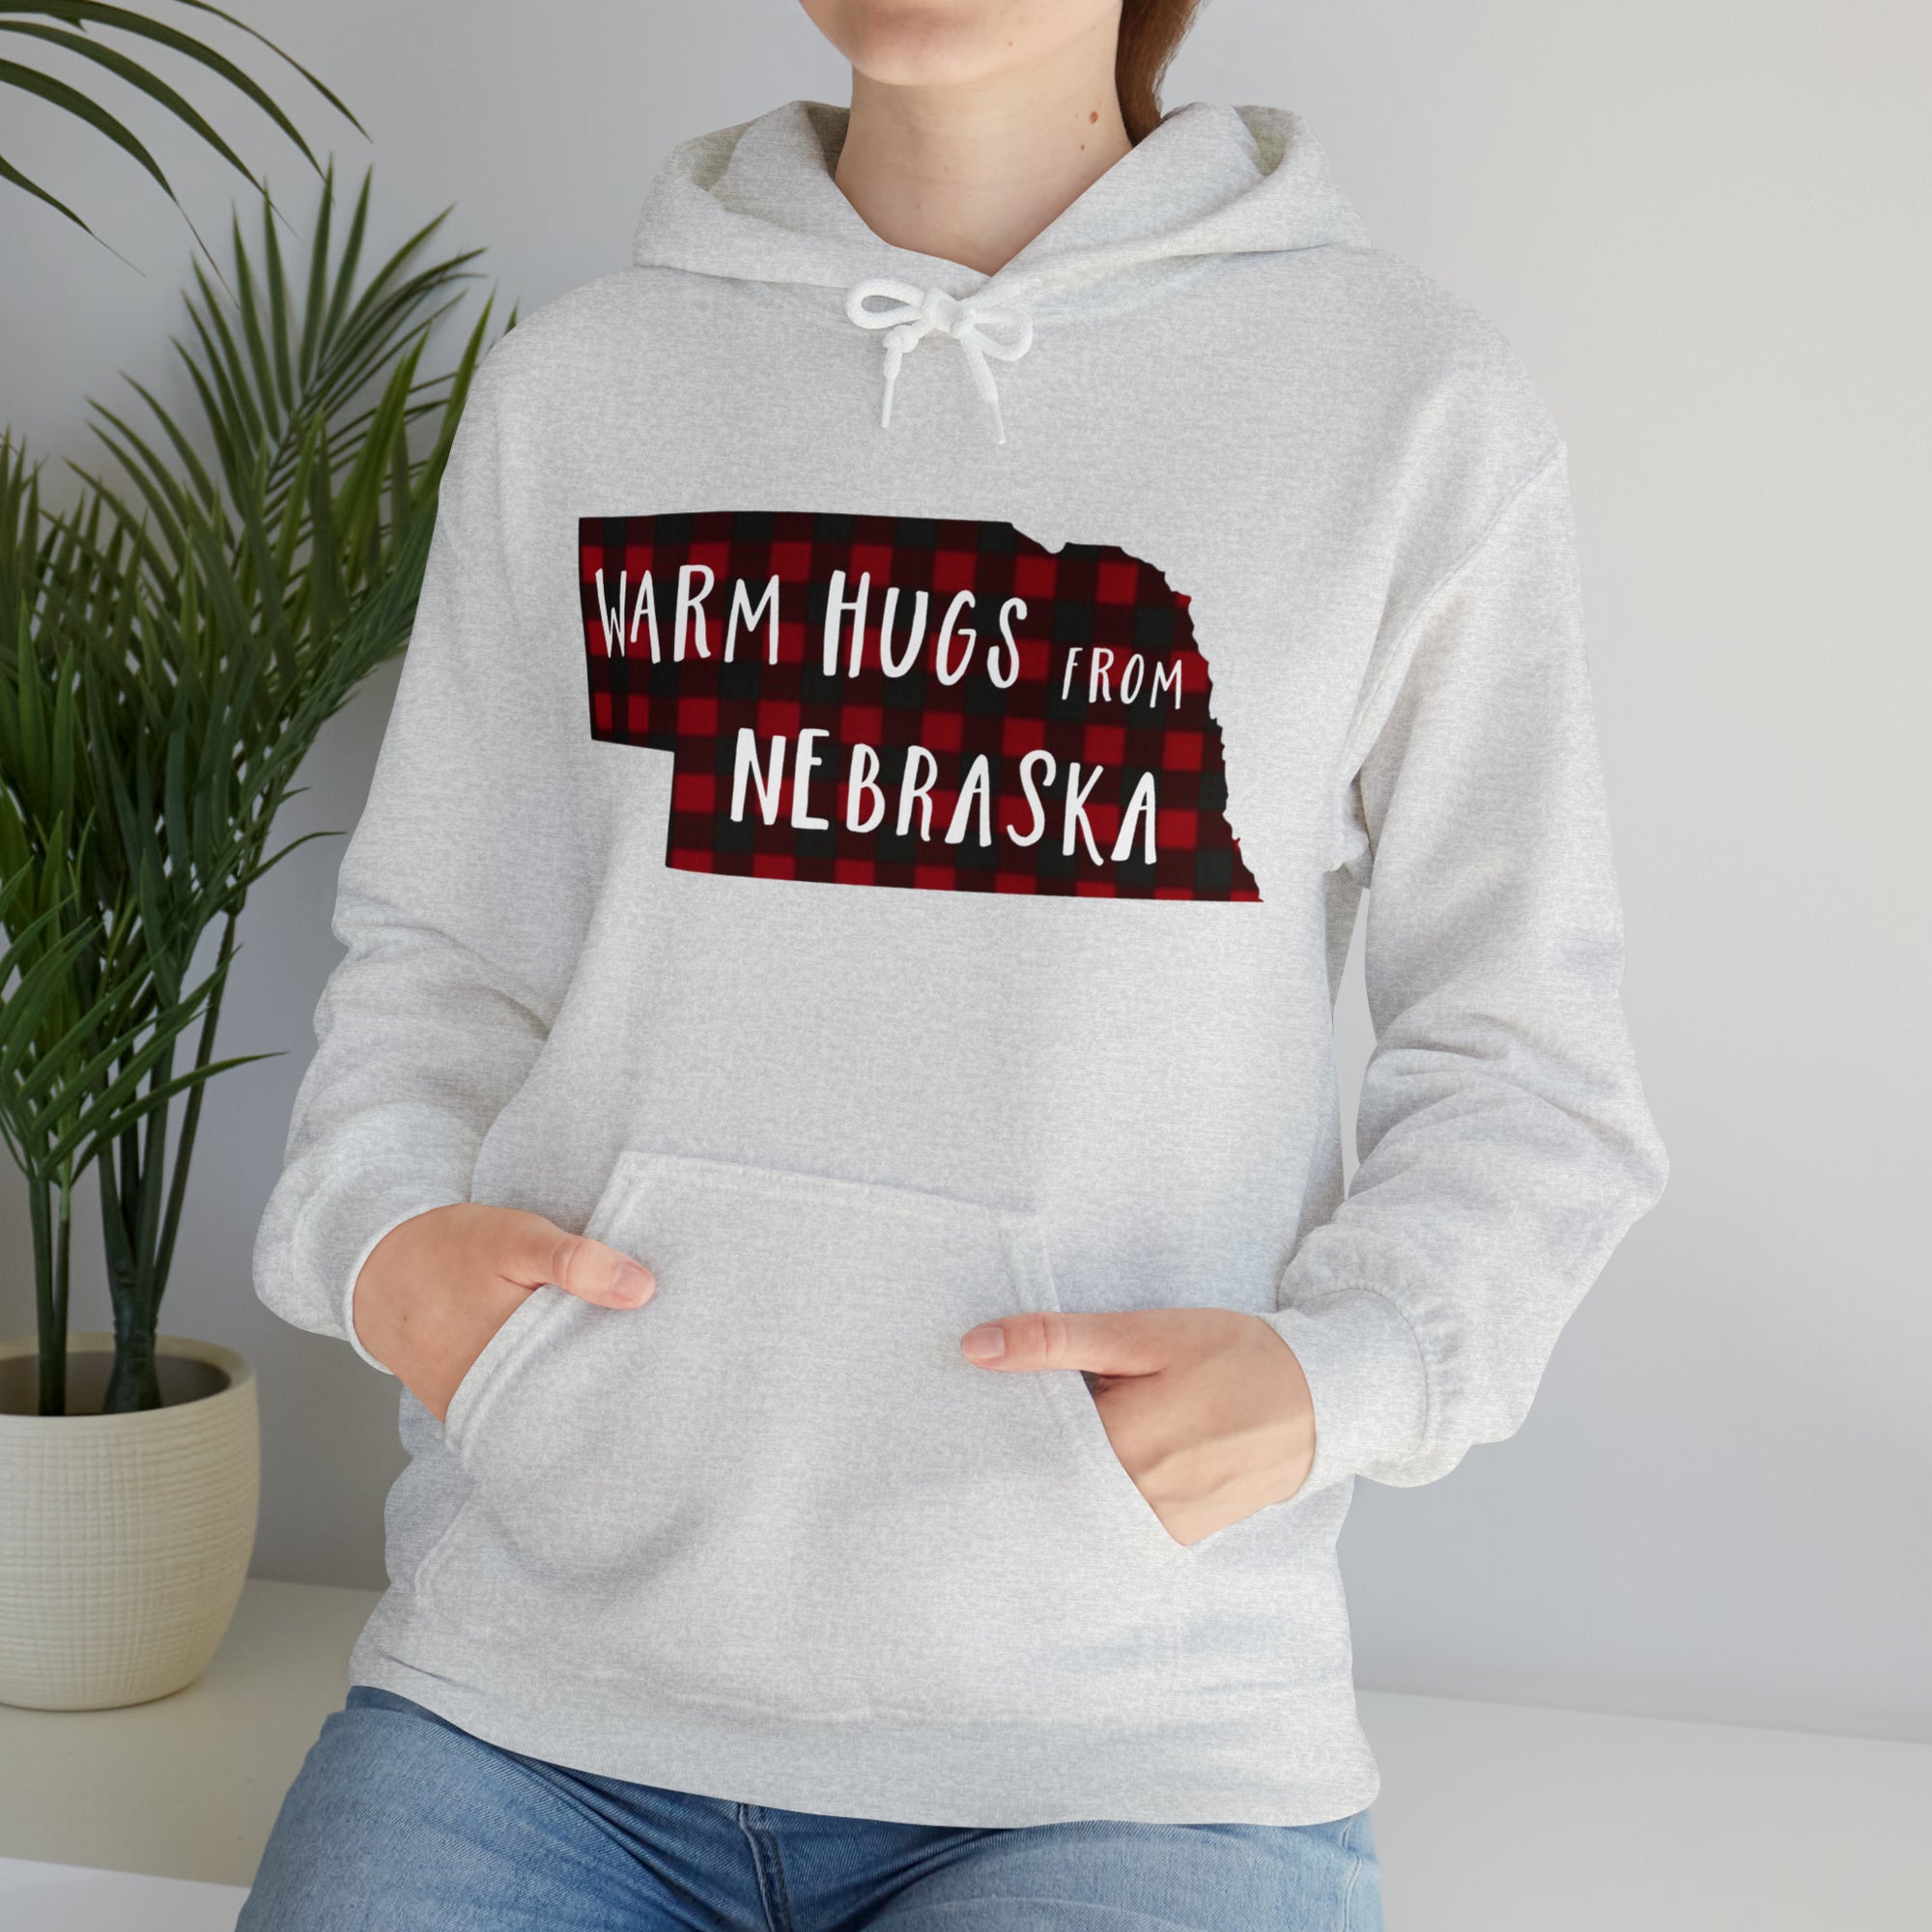 Light Gray hooded sweatshirt with a black and red buffalo plaid design in the shape of Nebraska that says, "Warm Hugs from Nebraska"